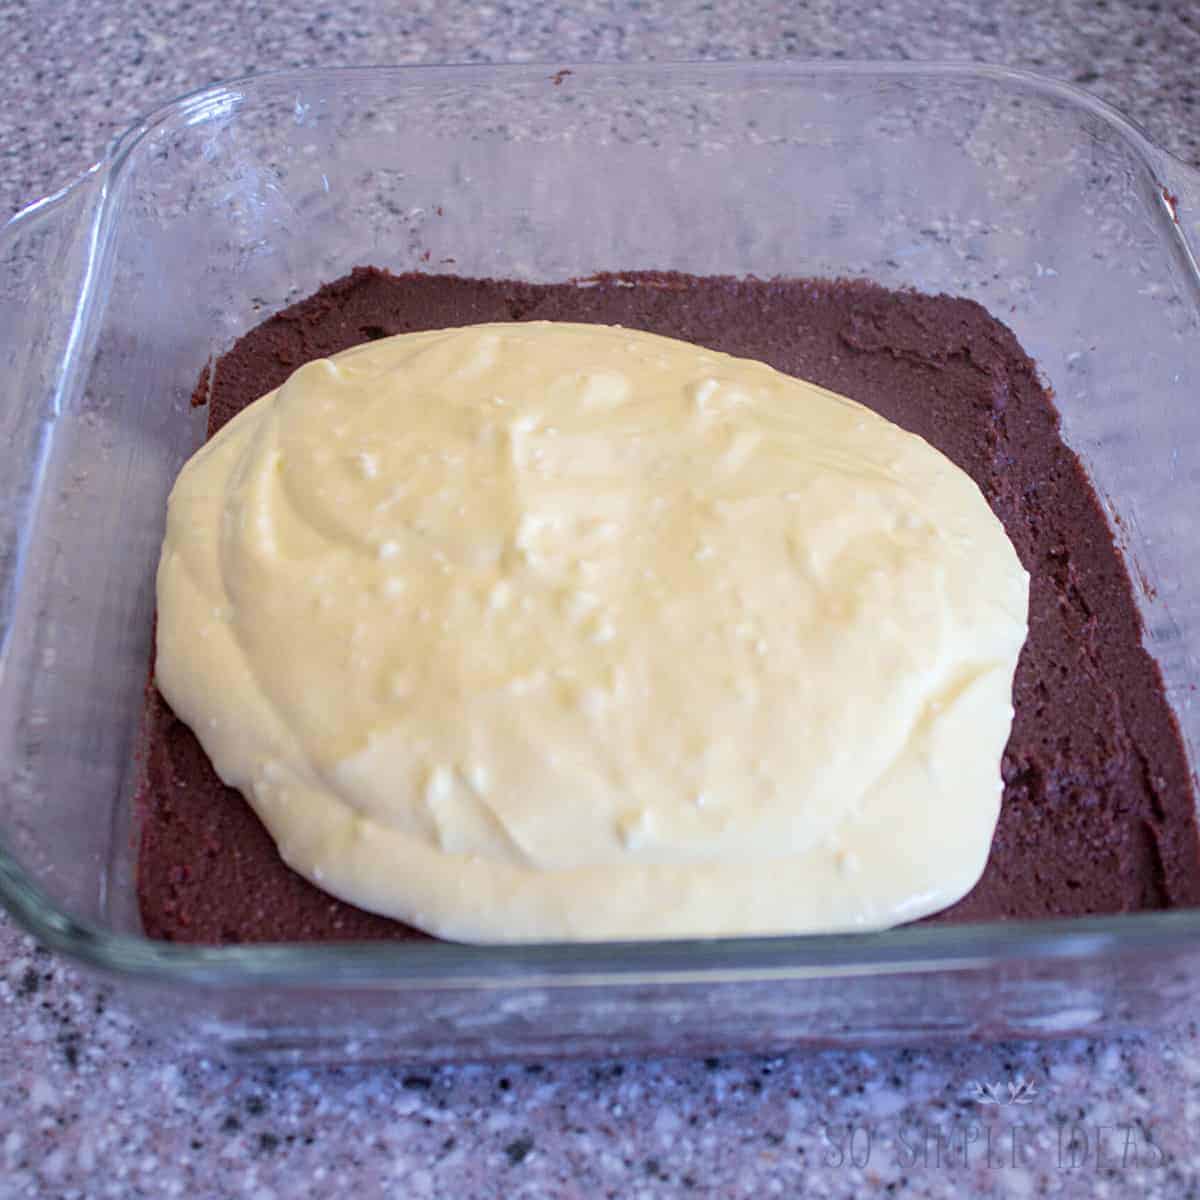 adding cheesecake layer over brownie layer.